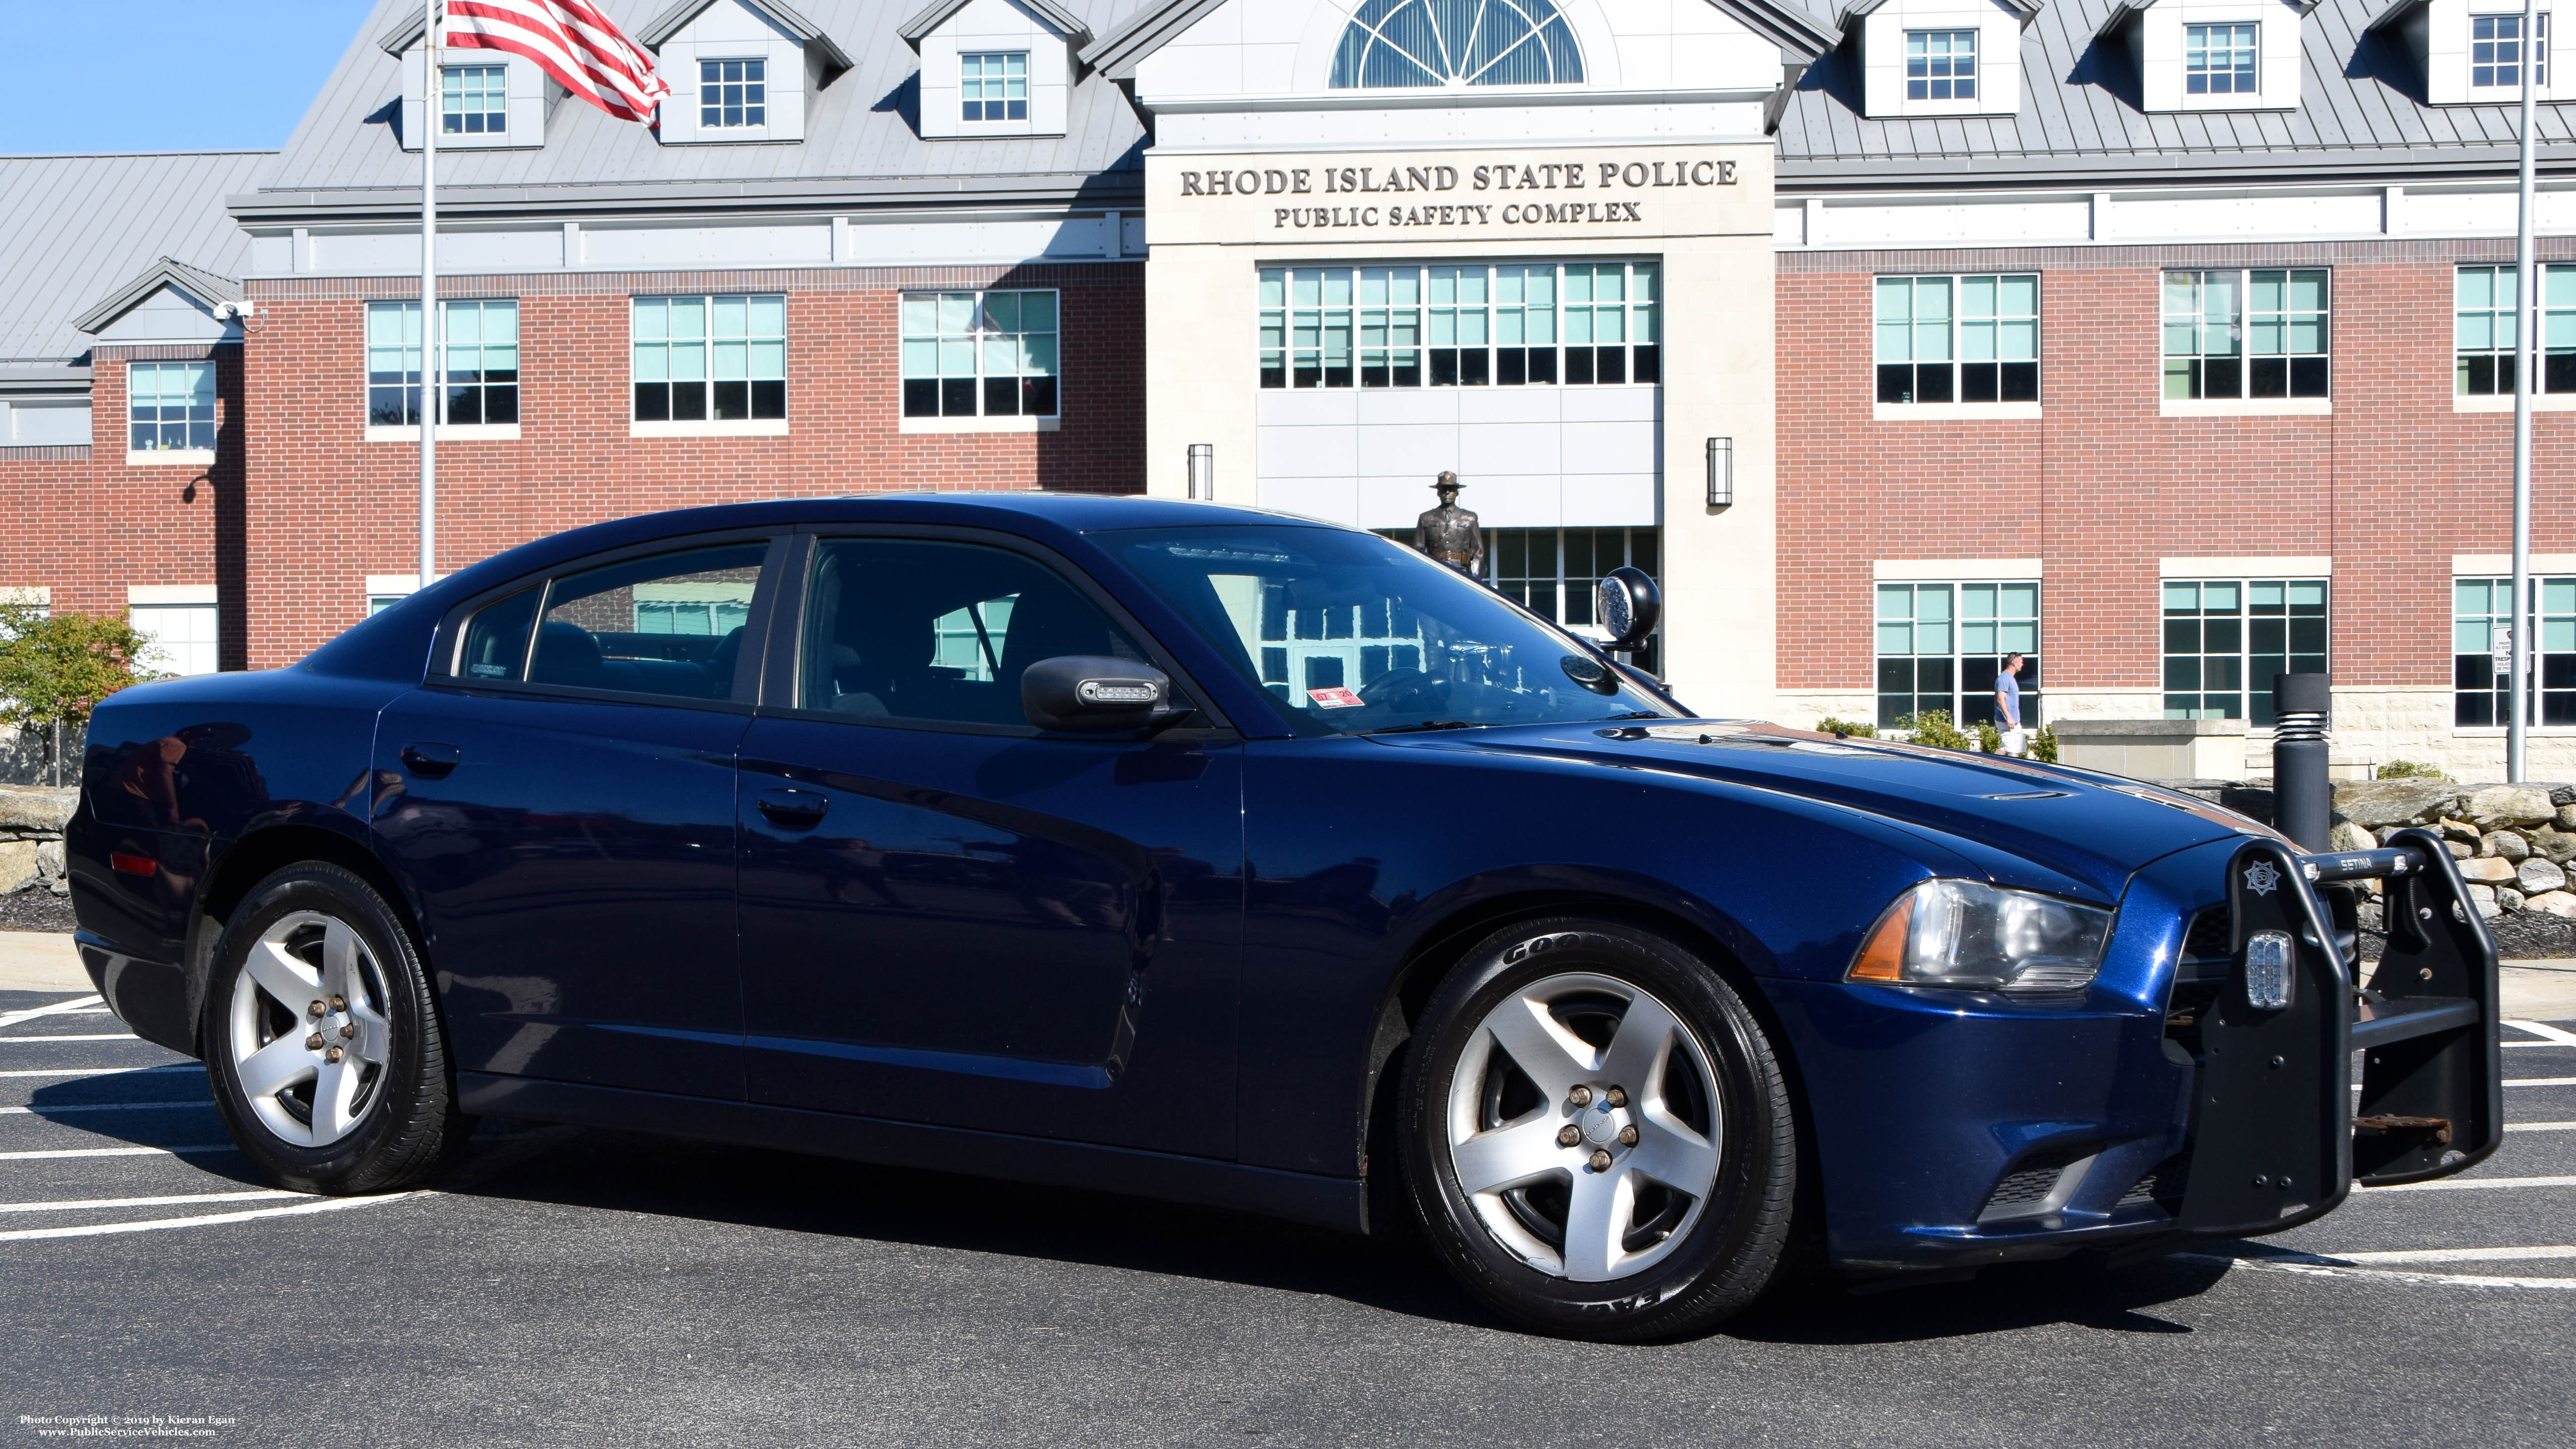 A photo  of Rhode Island State Police
            Cruiser 91, a 2013 Dodge Charger             taken by Kieran Egan